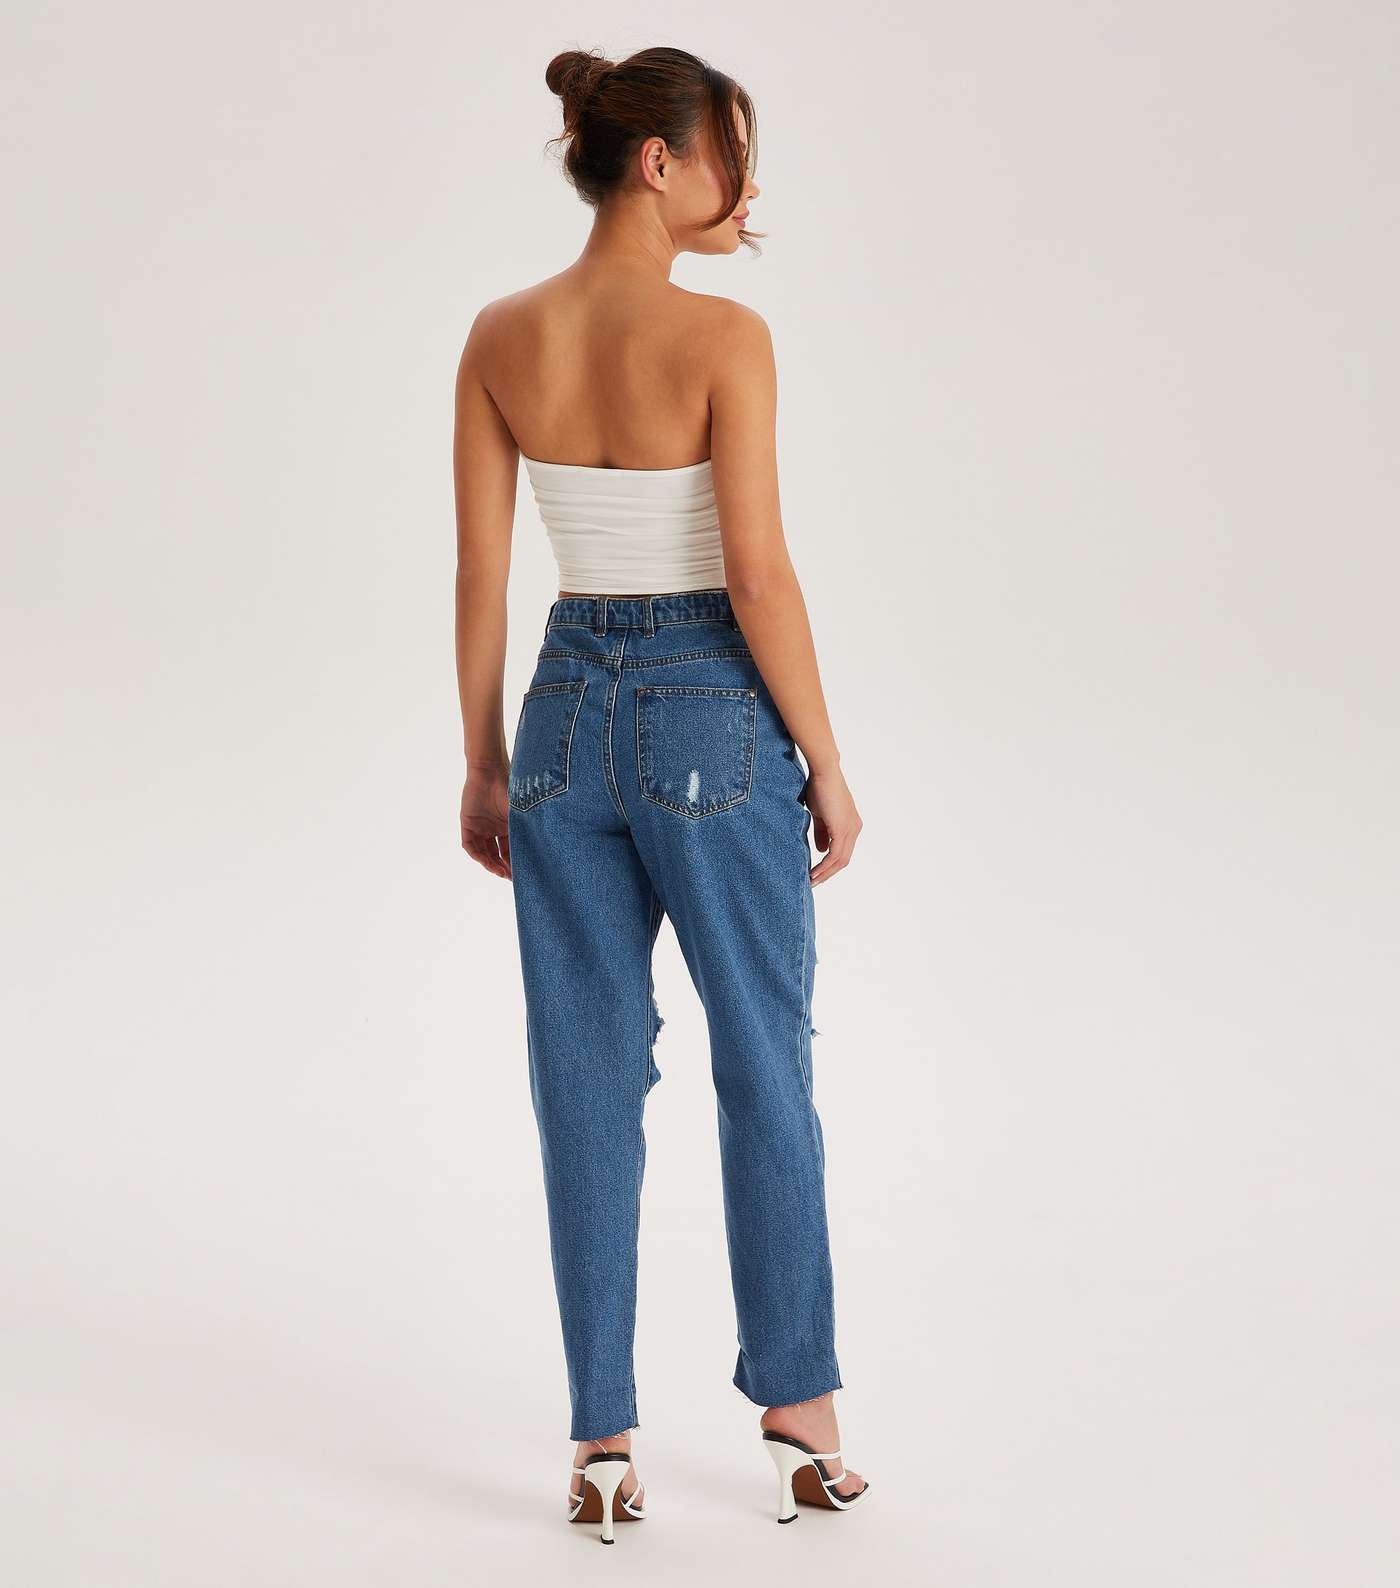 Urban Bliss Blue Ripped Mom Jeans Image 4